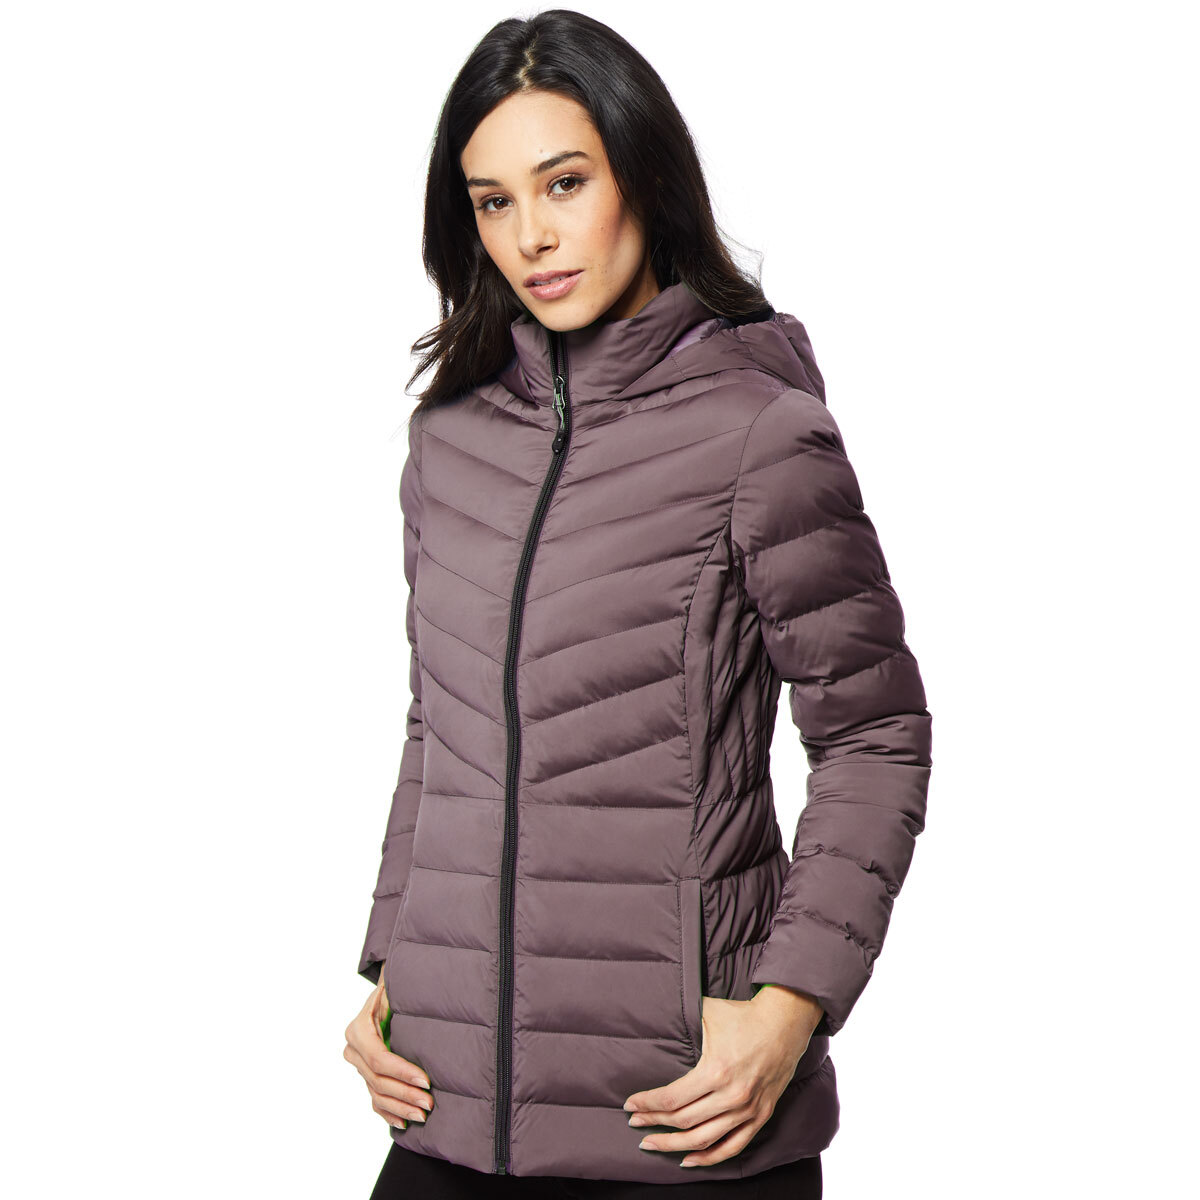 NEW WOMEN'S 32 DEGREES HEAT QUILTED PACKABLE DOWN JACKET 650 FILL POWER VARIETY